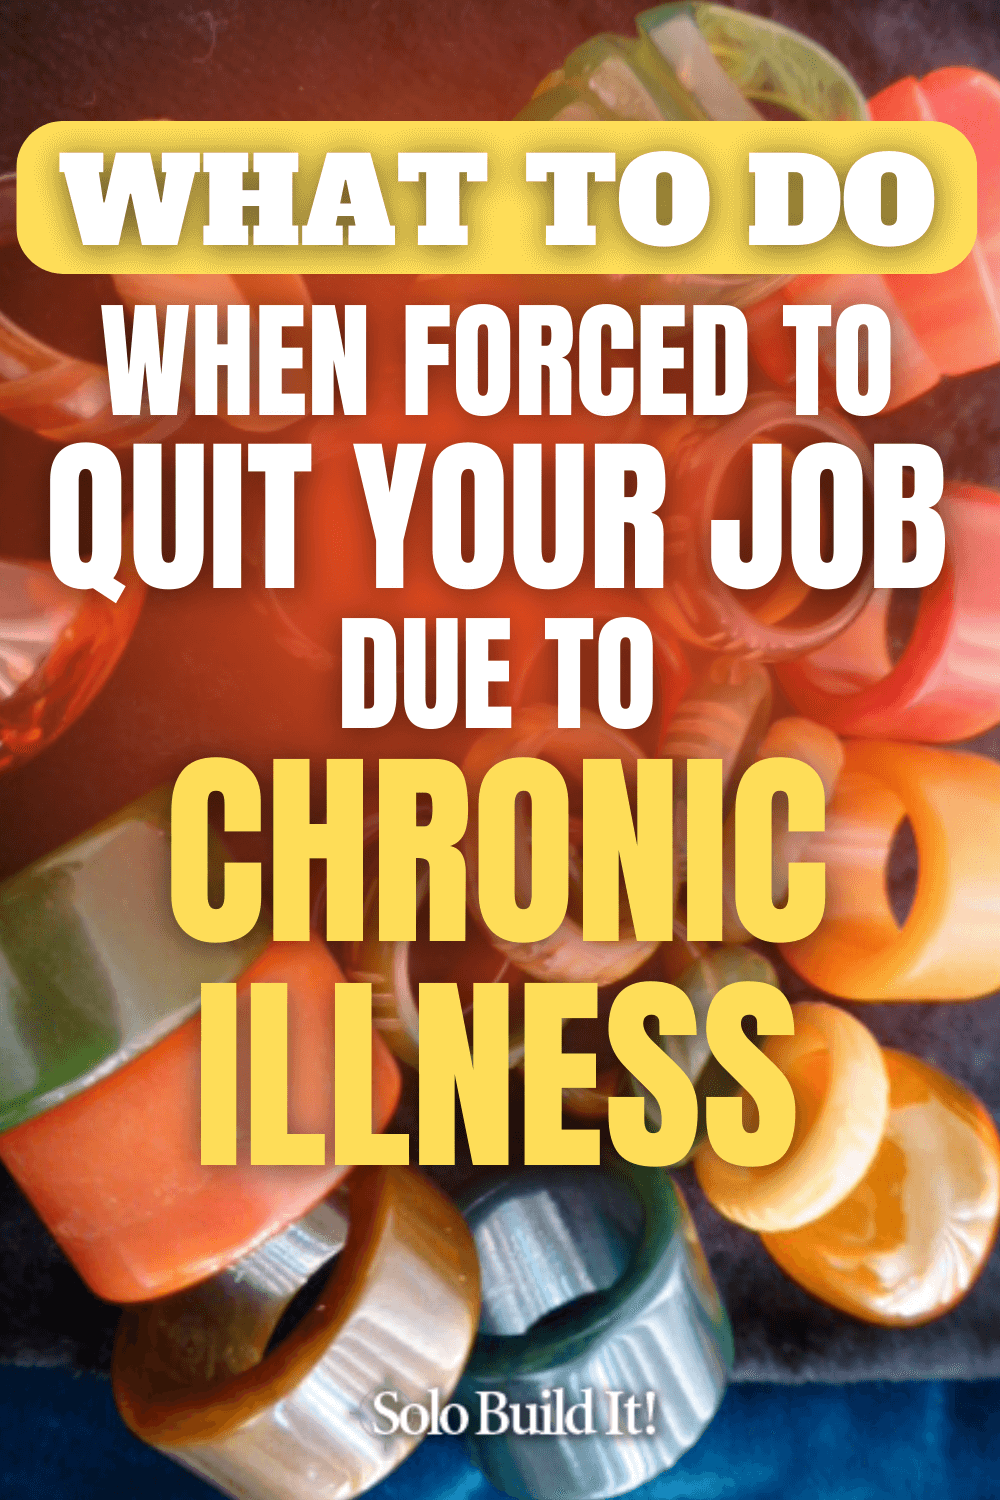 How I Thrived When Forced to Quit My Job Due to Chronic Illness